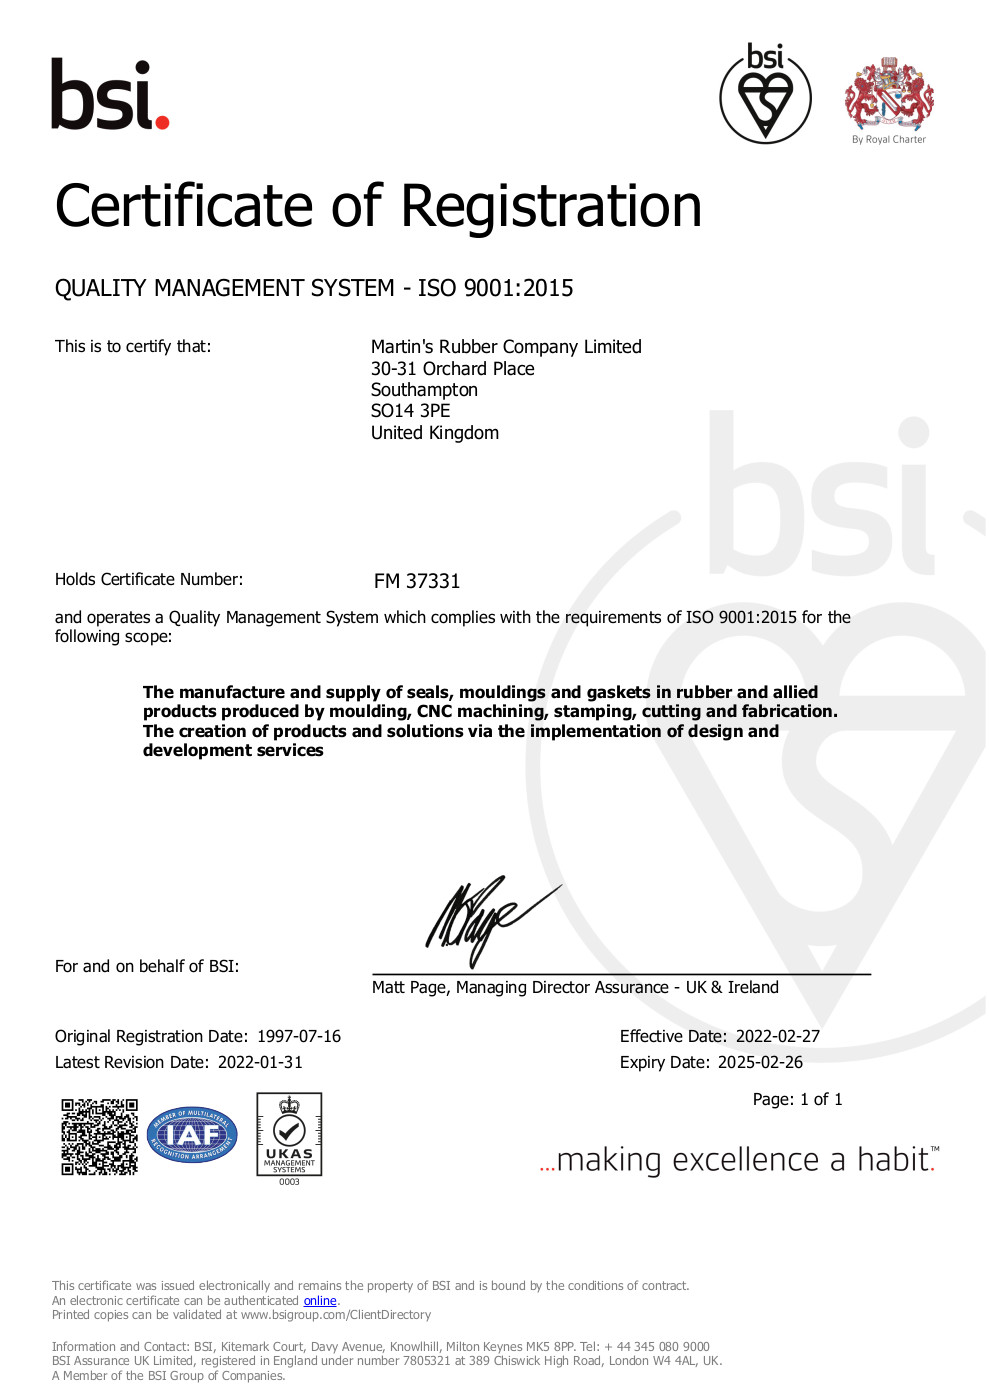 ISO Certificate FM 37331 2022 to 2025